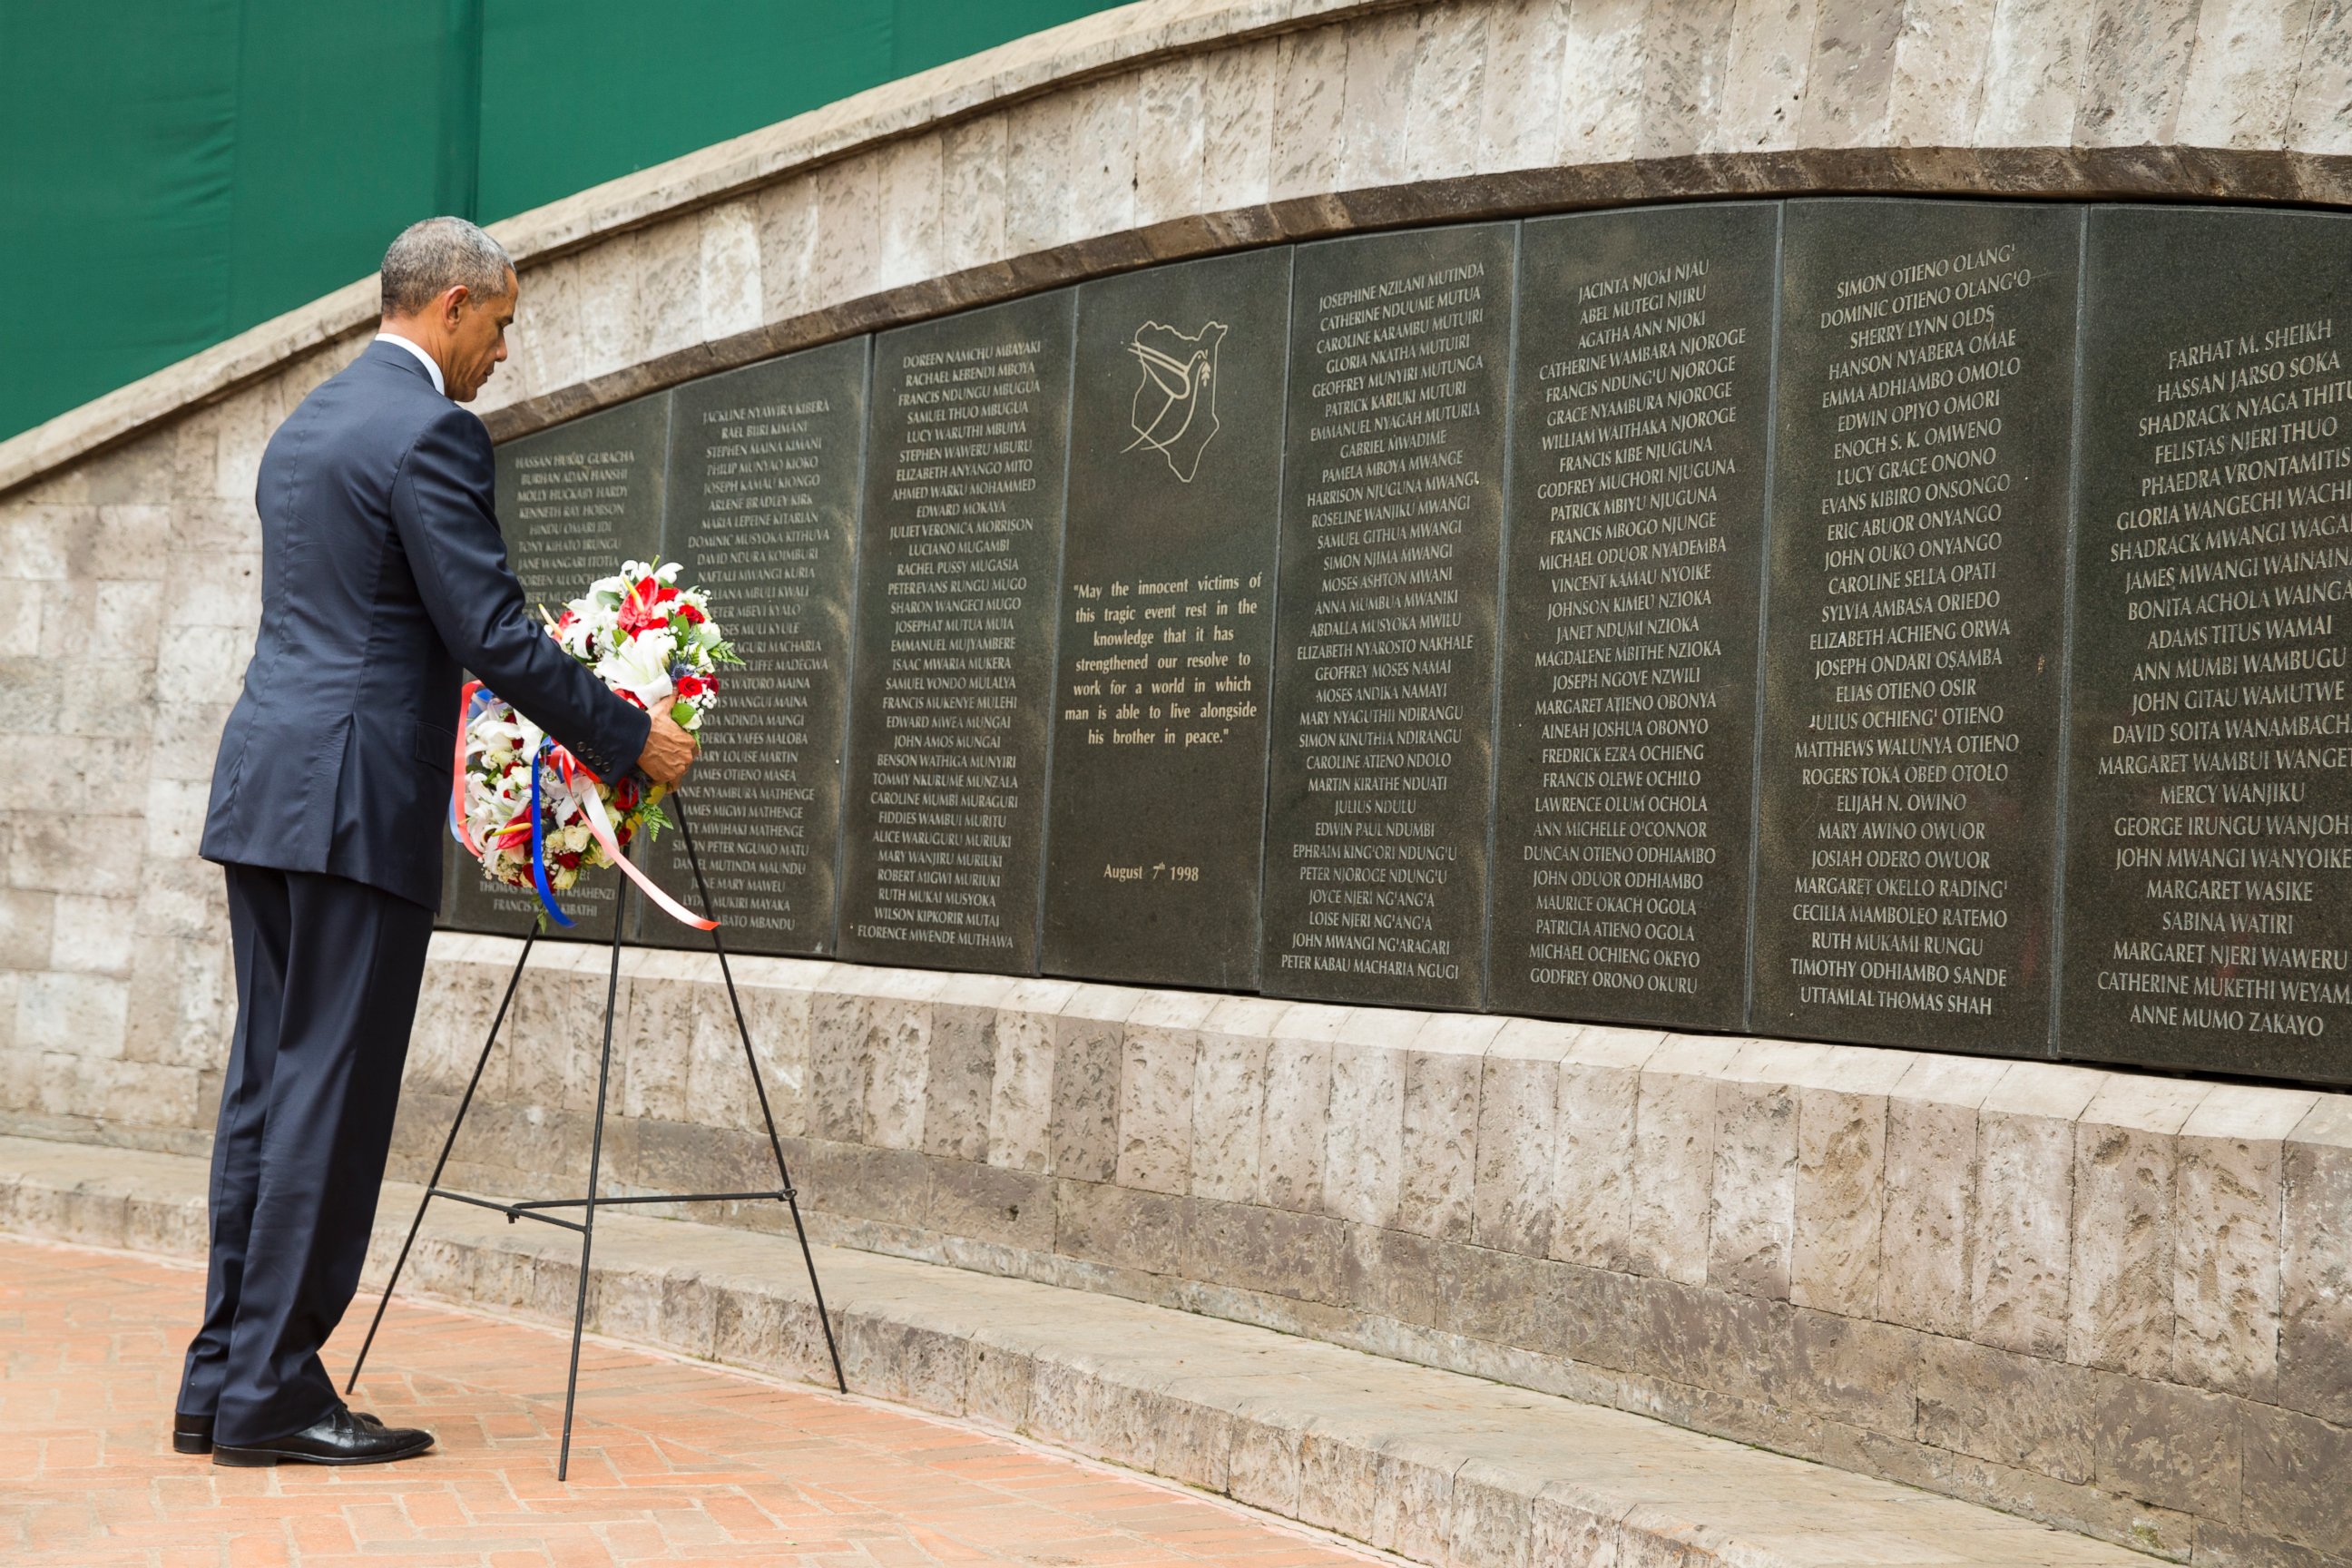 PHOTO: President Barack Obama participates in a wreath laying ceremony, Saturday, July 25, 2015, in Nairobi, at Memorial Park in honor of the victims of the deadly 1998 bombing at the U.S. Embassy.